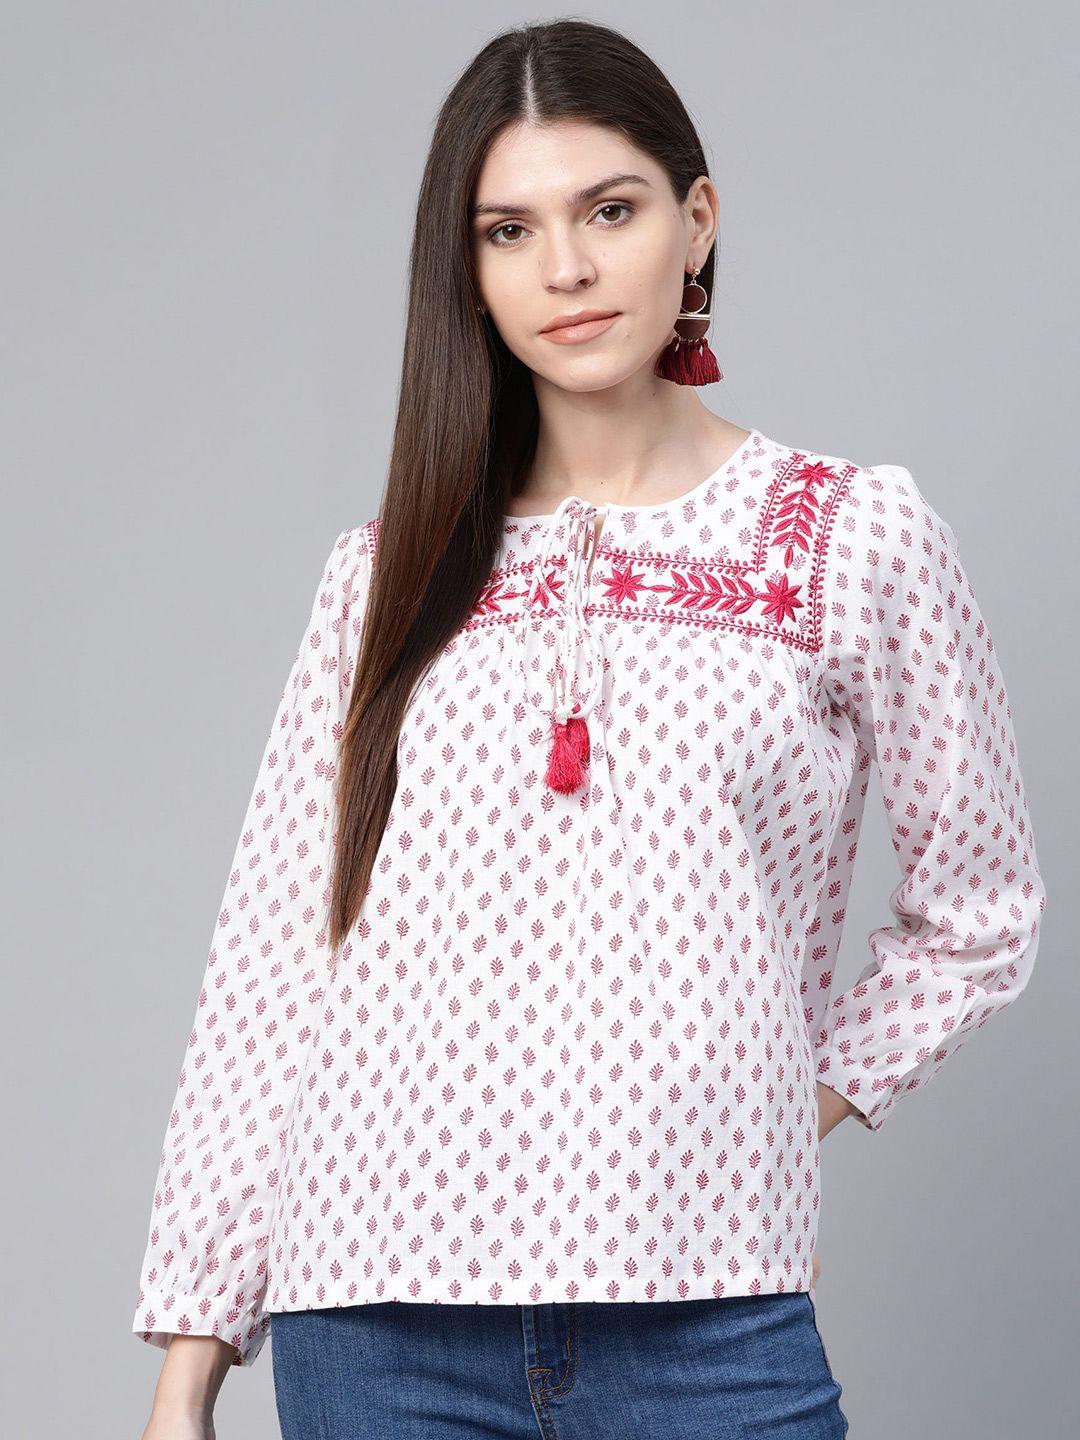 rangriti-women-white-&-pink-embroidered-ethnic-printed-top